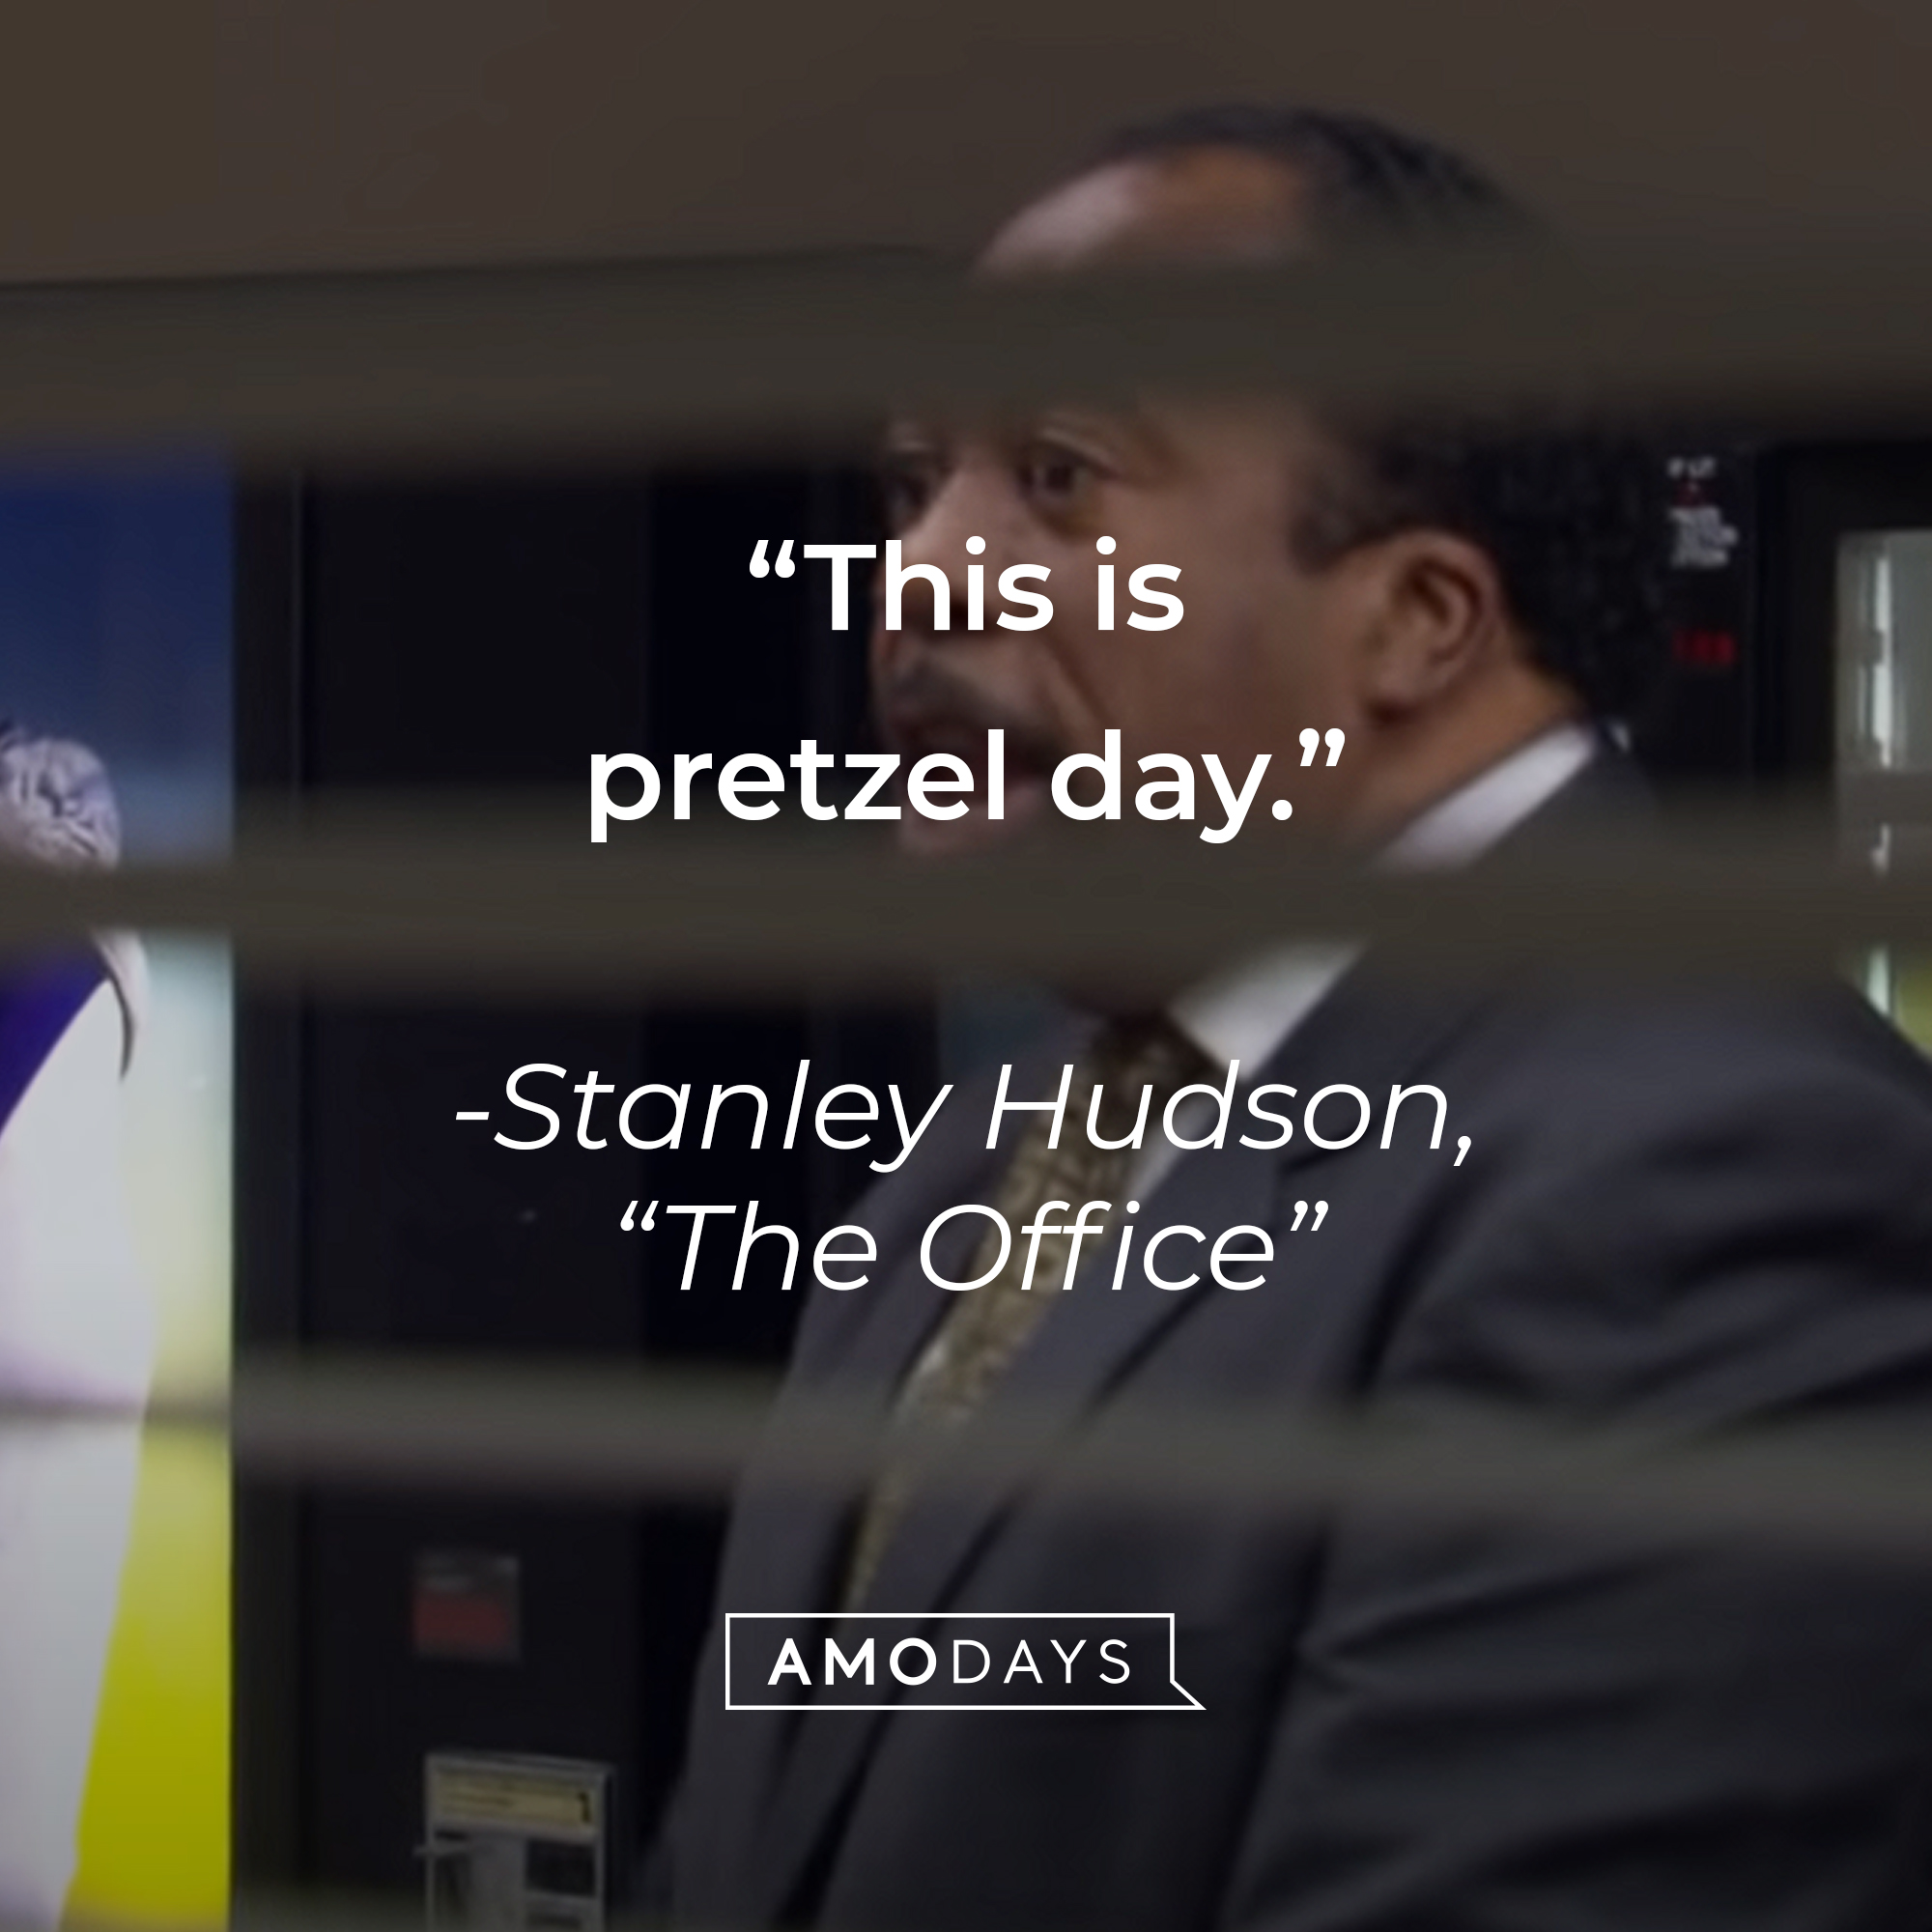 An image of Leslie David Baker as Stanley Hudson in "The Office" with the quote: “This is pretzel day.” | Source: youtube.com/The Office